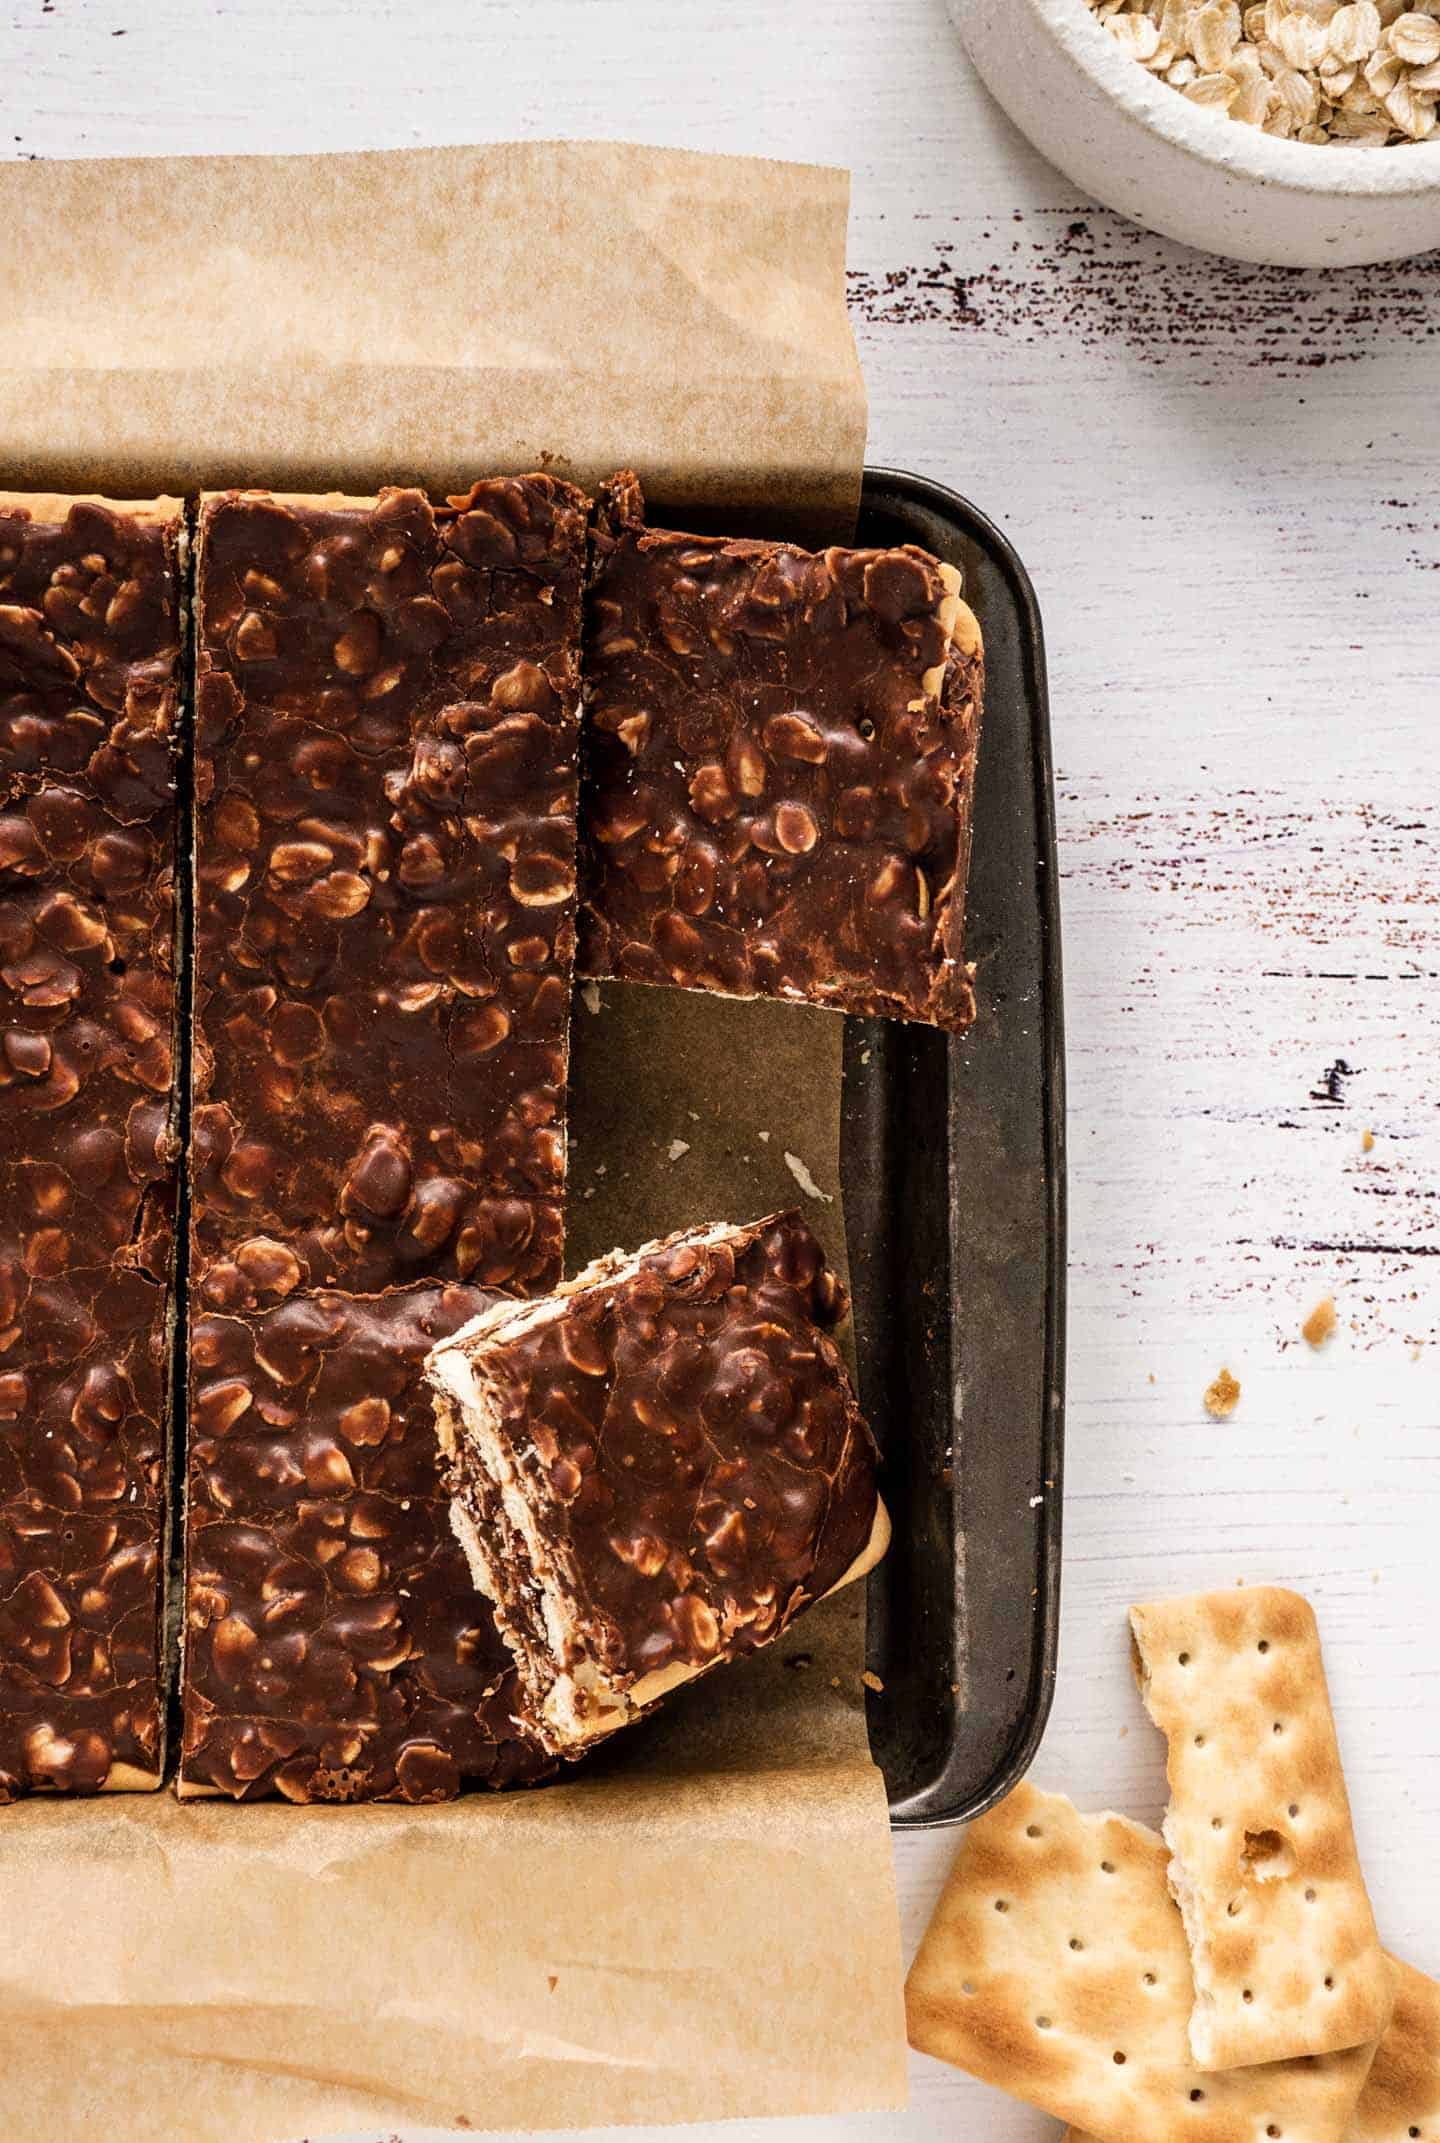 Melted chocolate and oats in layers of crackers, an absolute classic of many Argentinians' childhood.